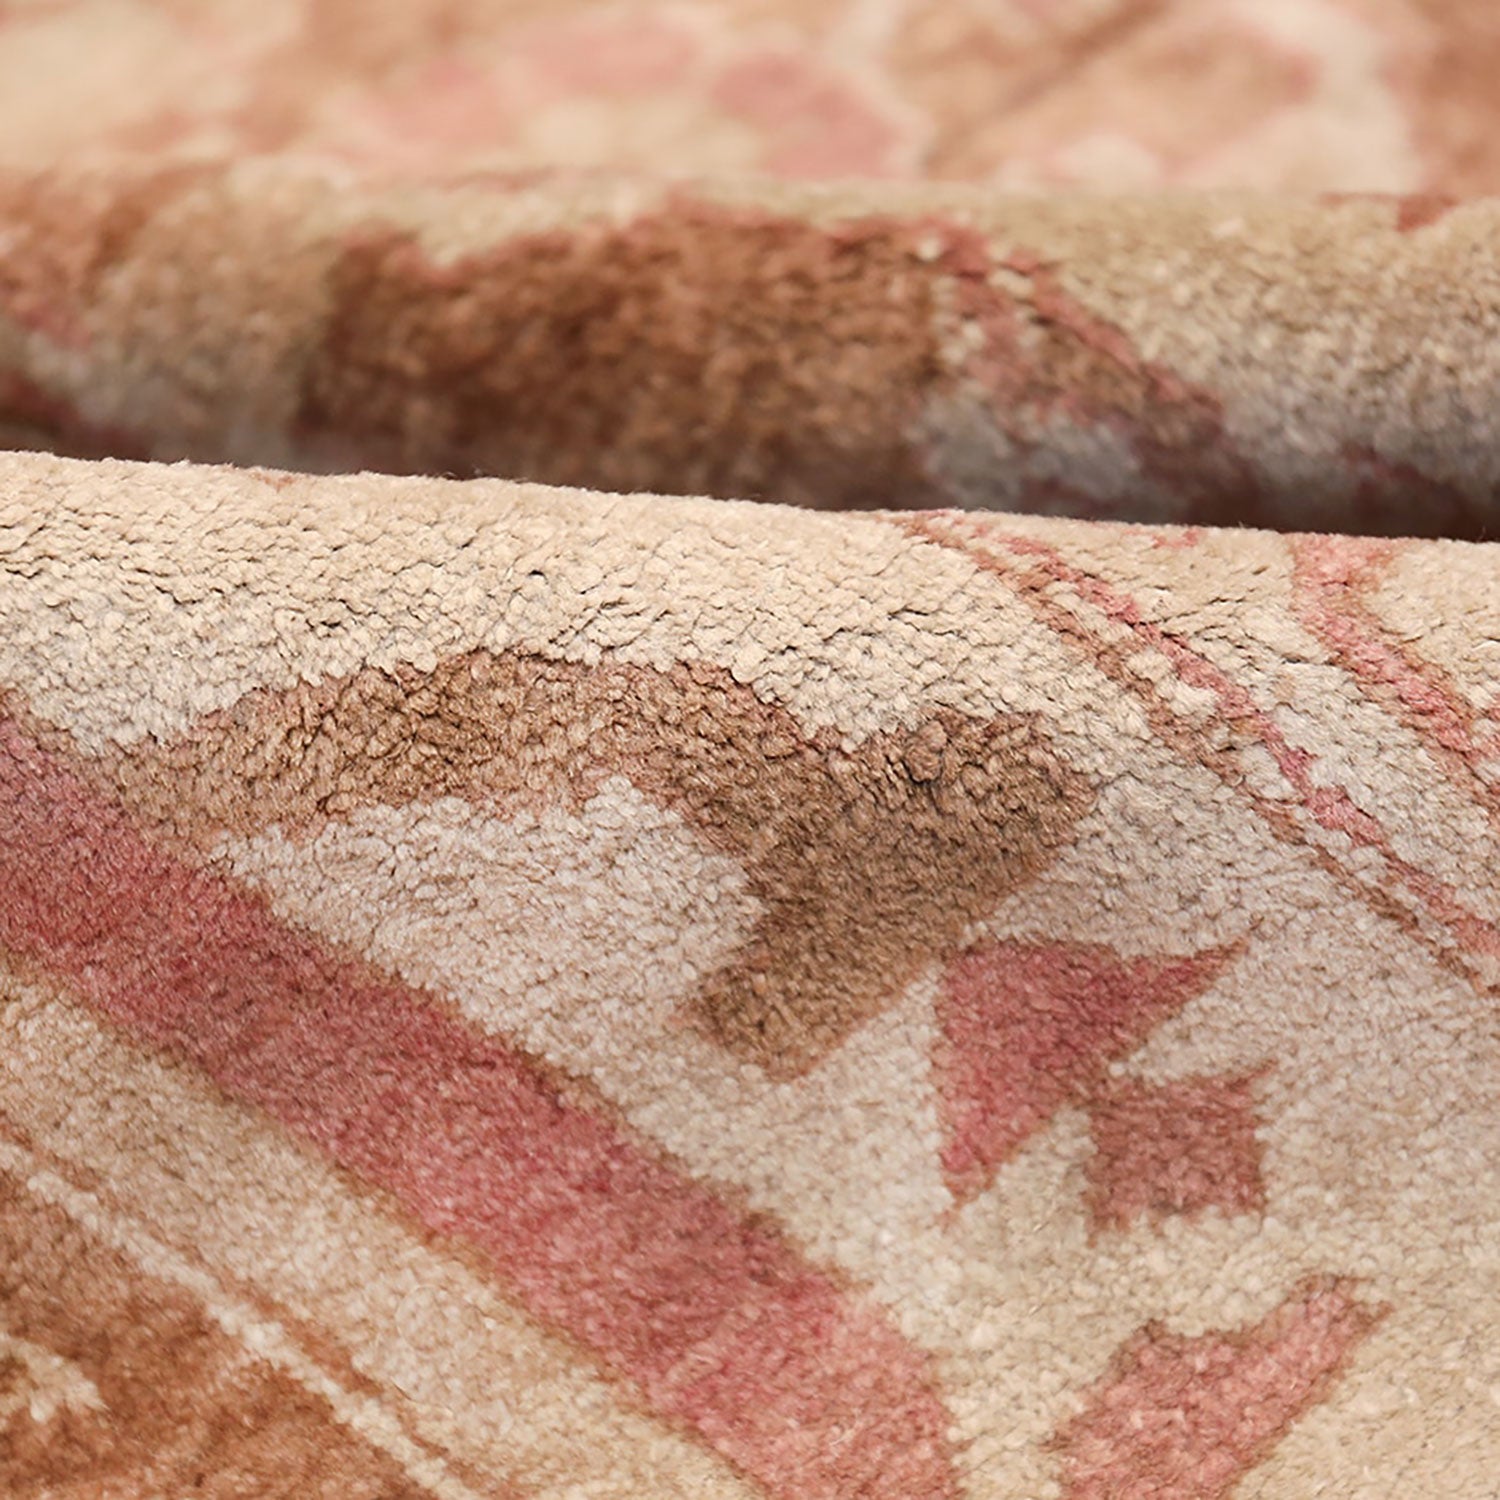 Close-up of a textured, patterned fabric in pink, beige, and brown.